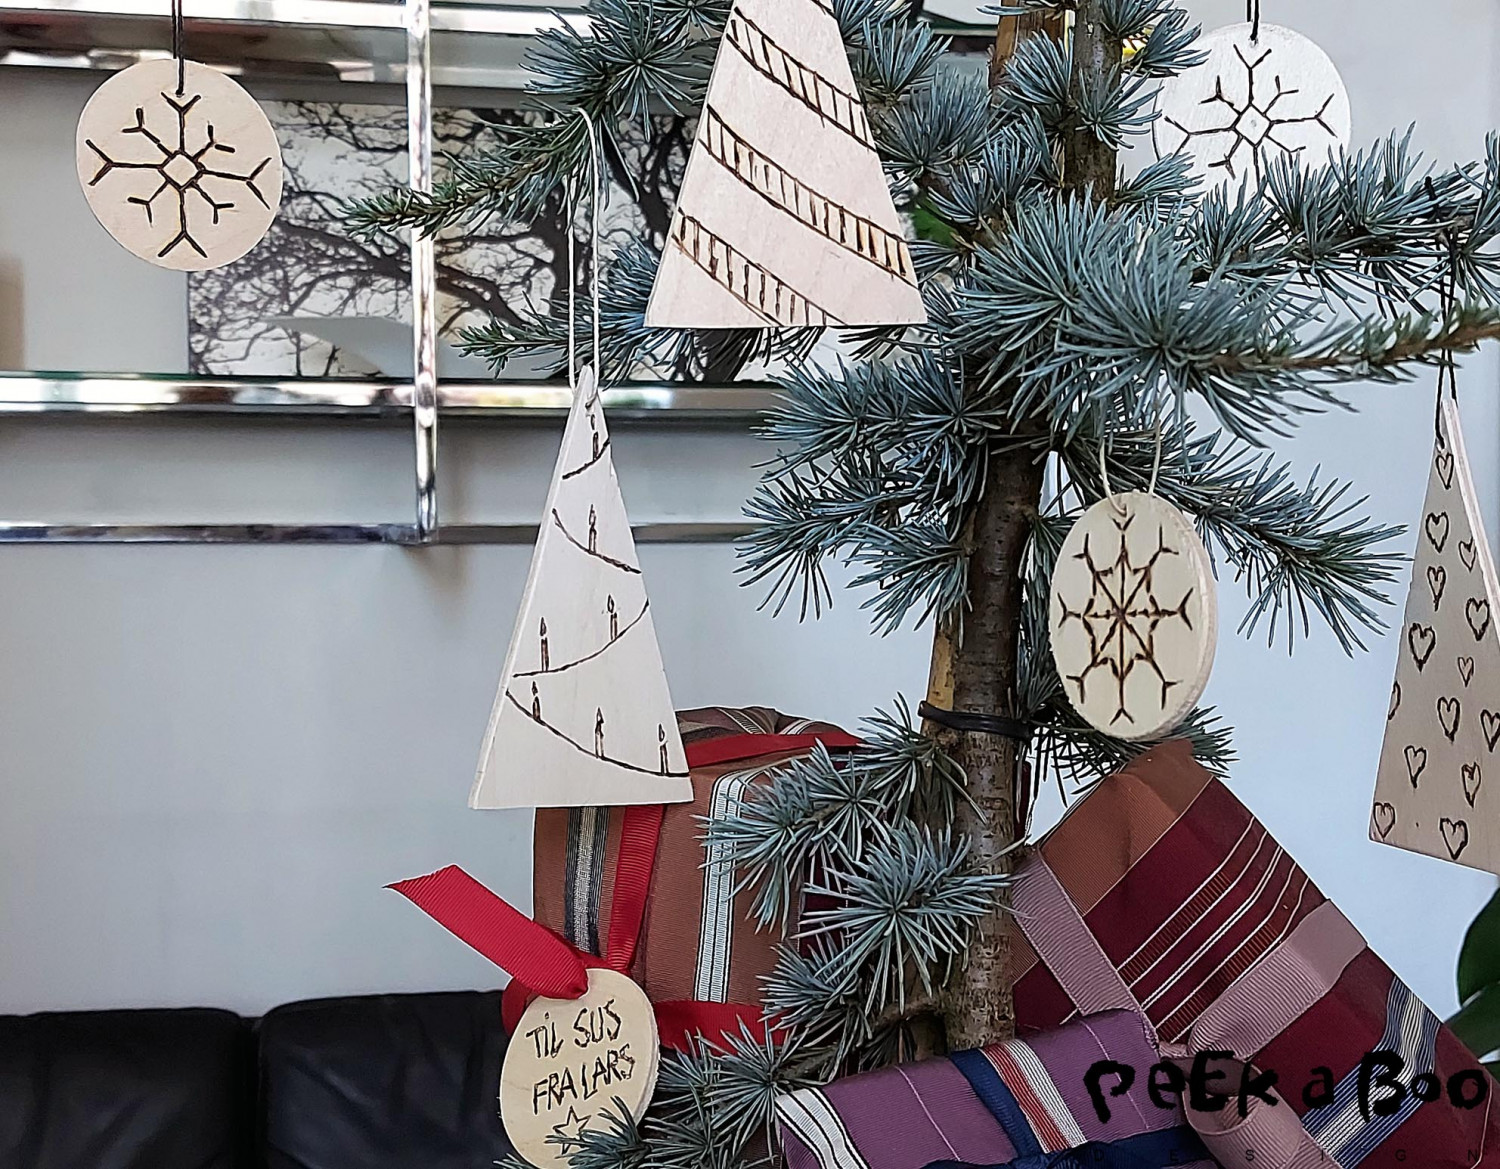 Nordic Christmas ornaments made by Peekaboo design with the Ryobi tools.